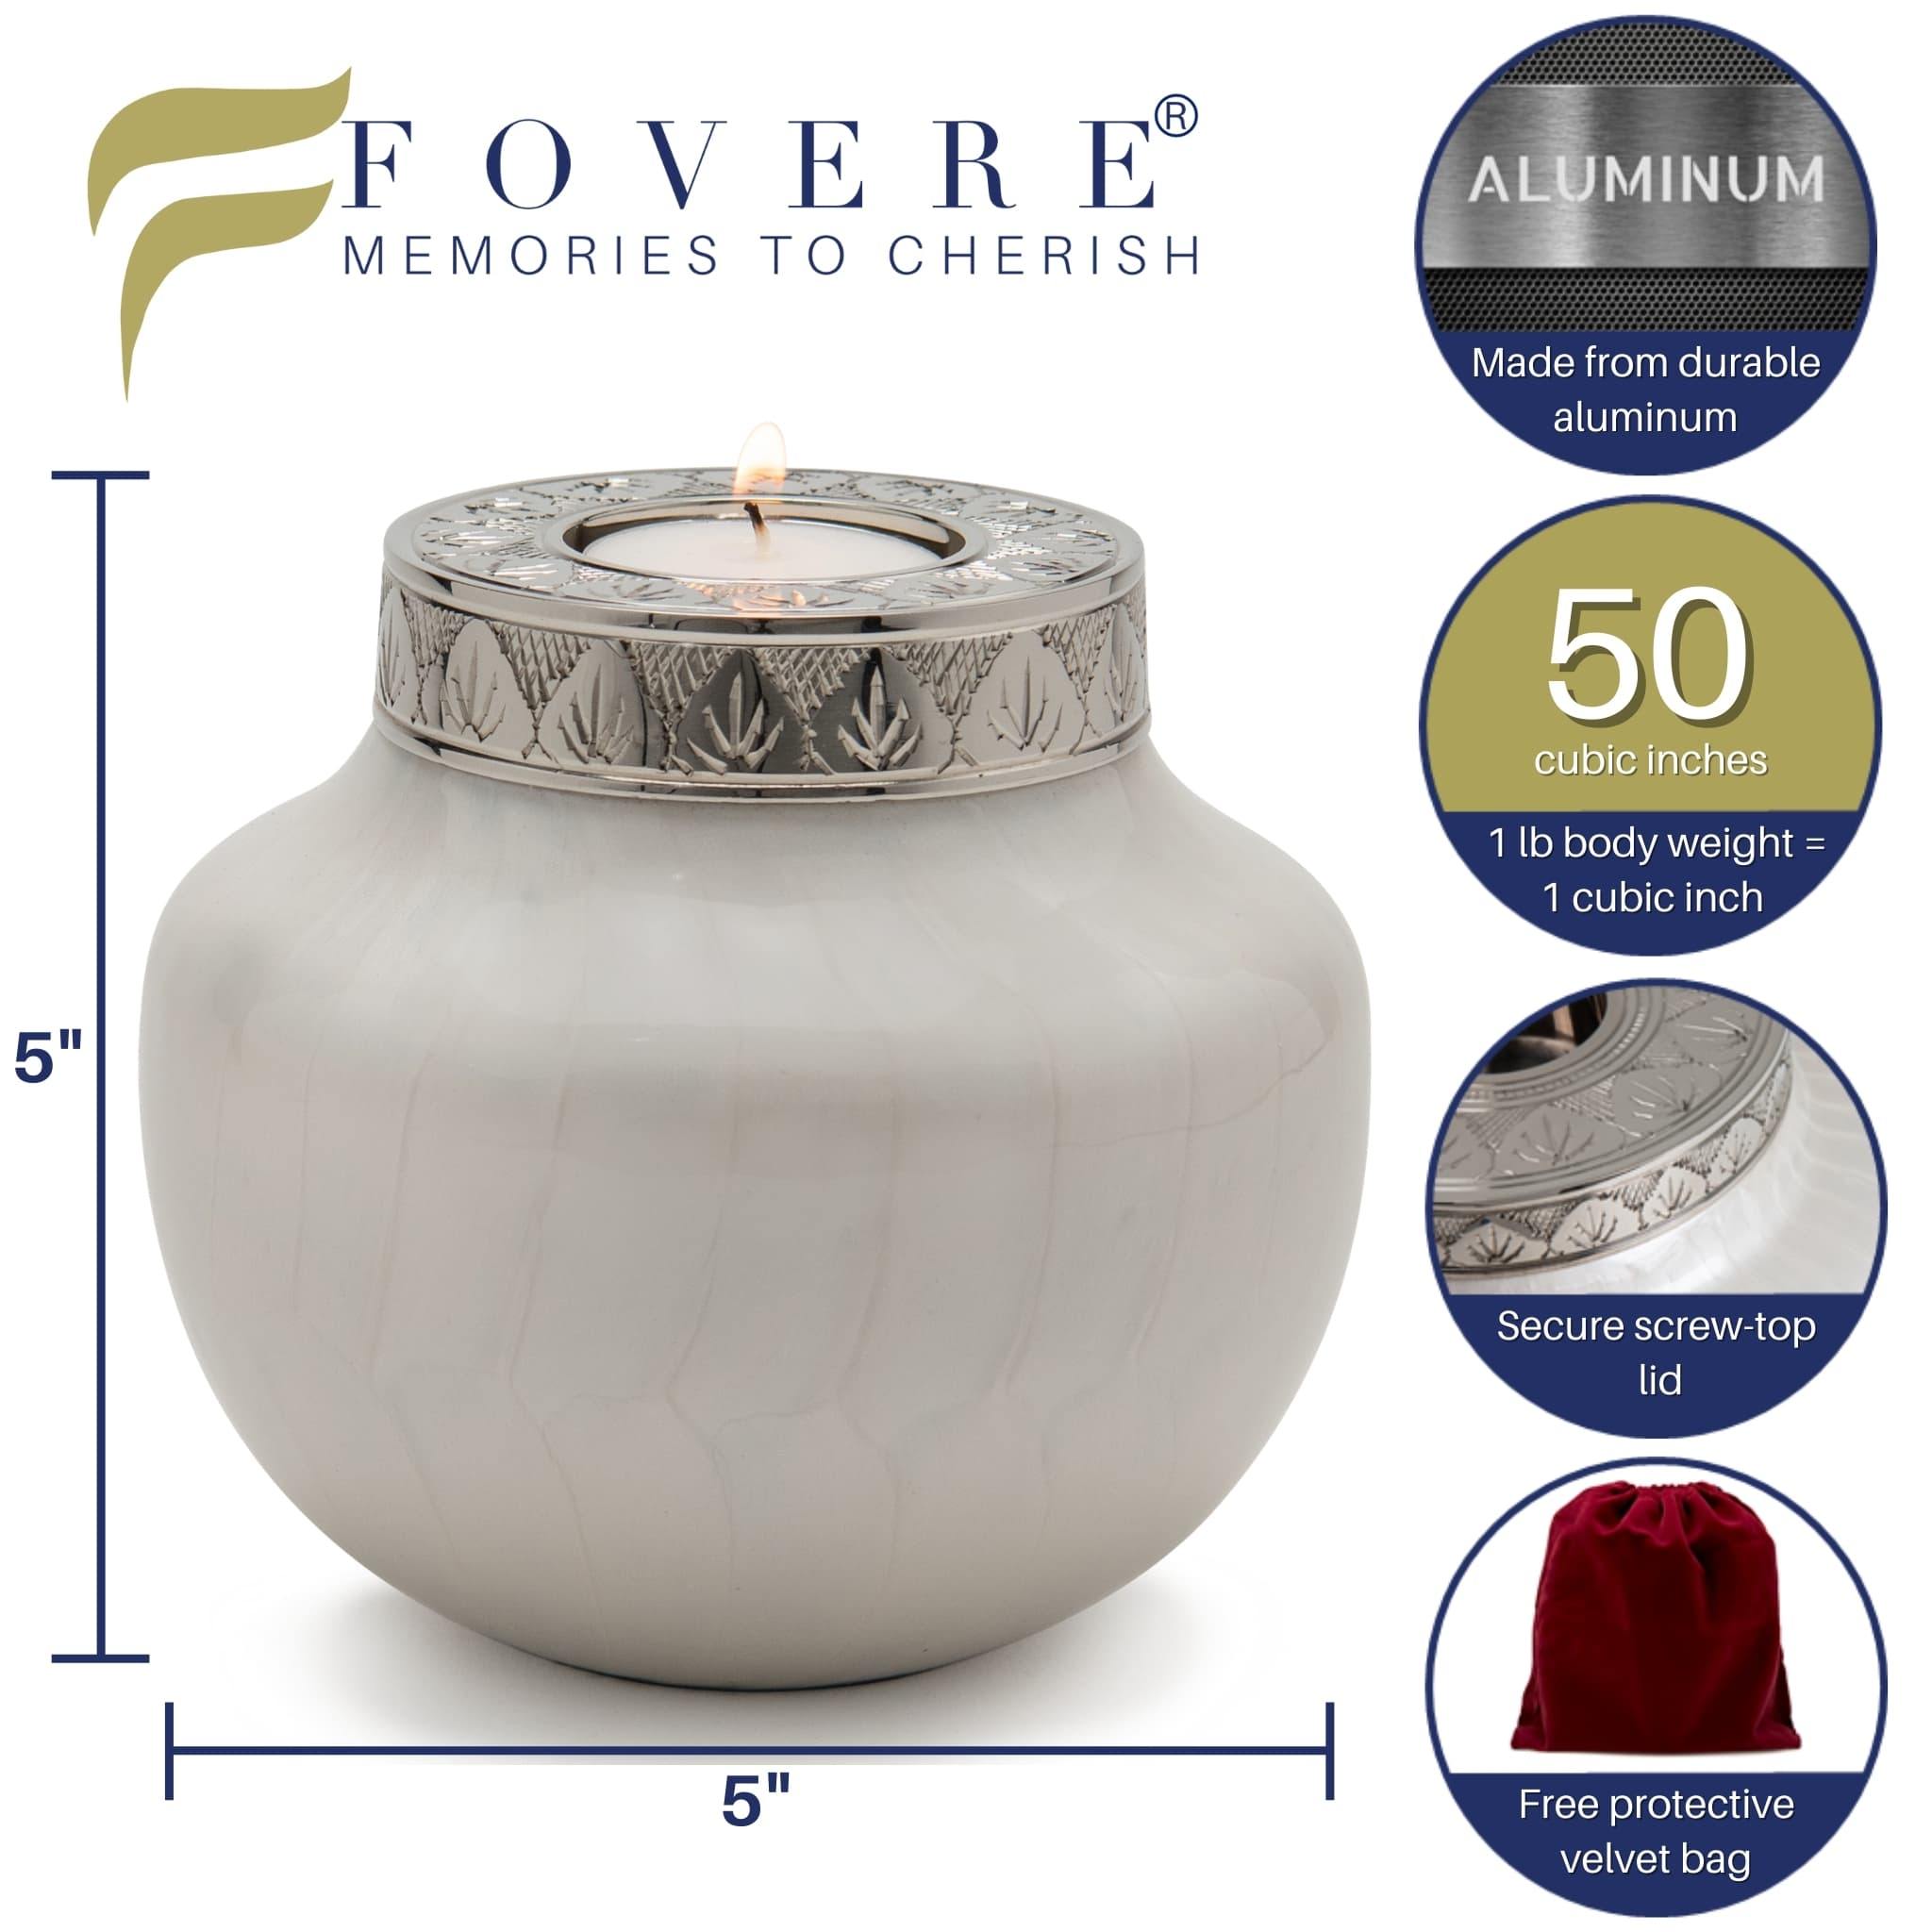 Small Candle Cremation Urn for Human Ashes – Small / Keepsake Urn, 50 Cubic Inches